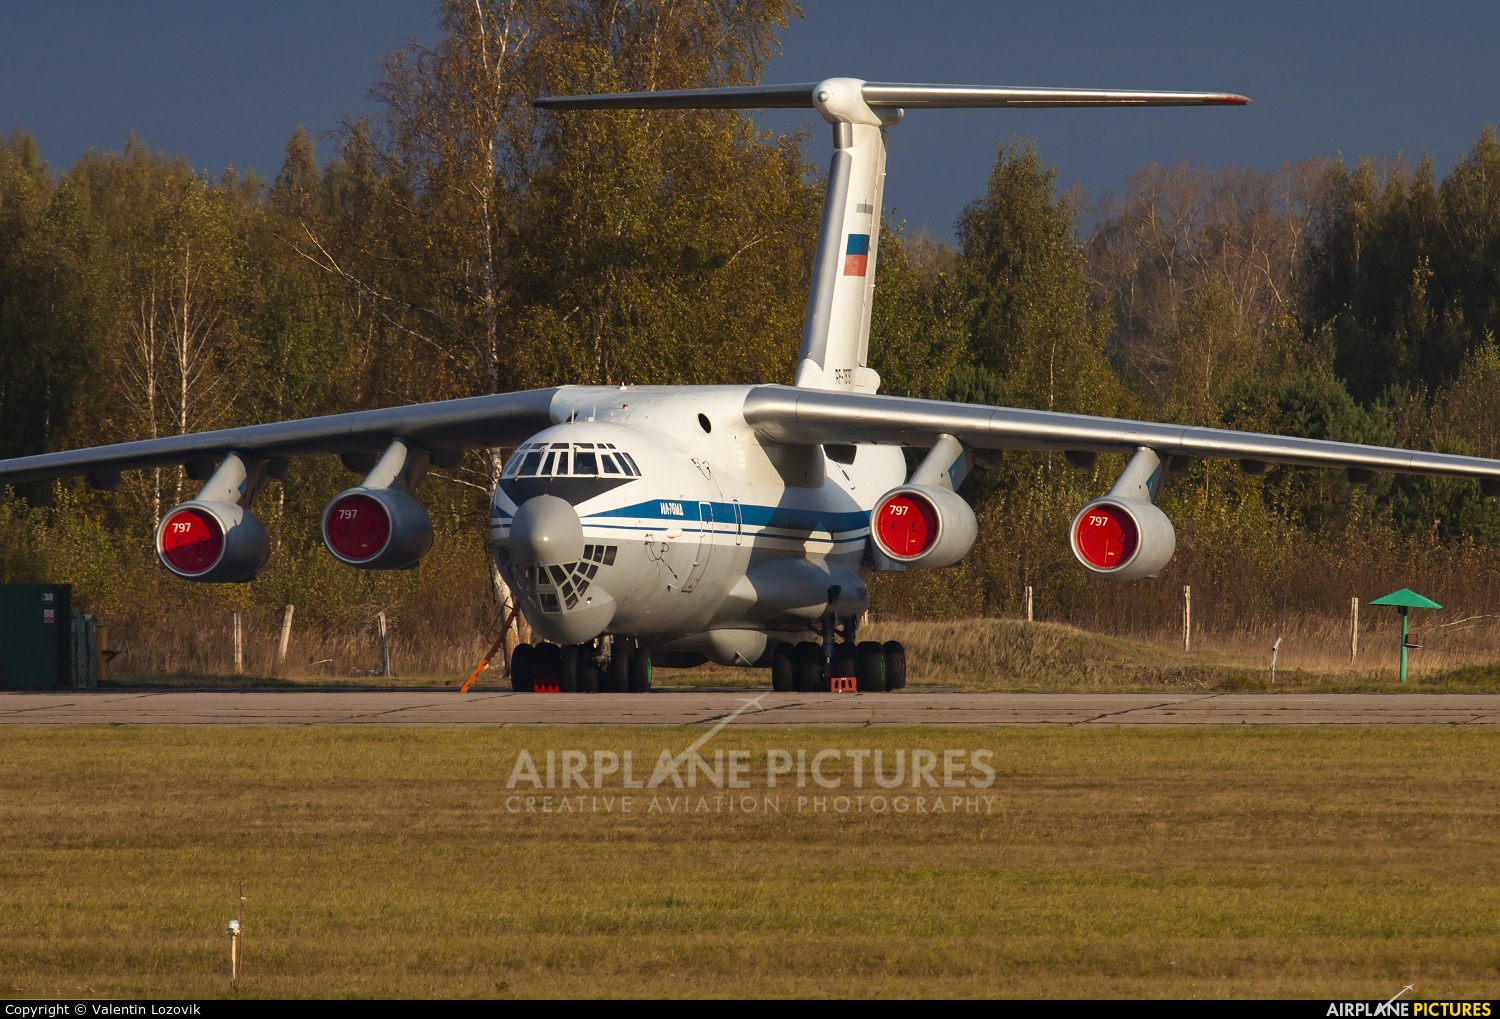 Russia - Air Force RF-78797 aircraft at Undisclosed location